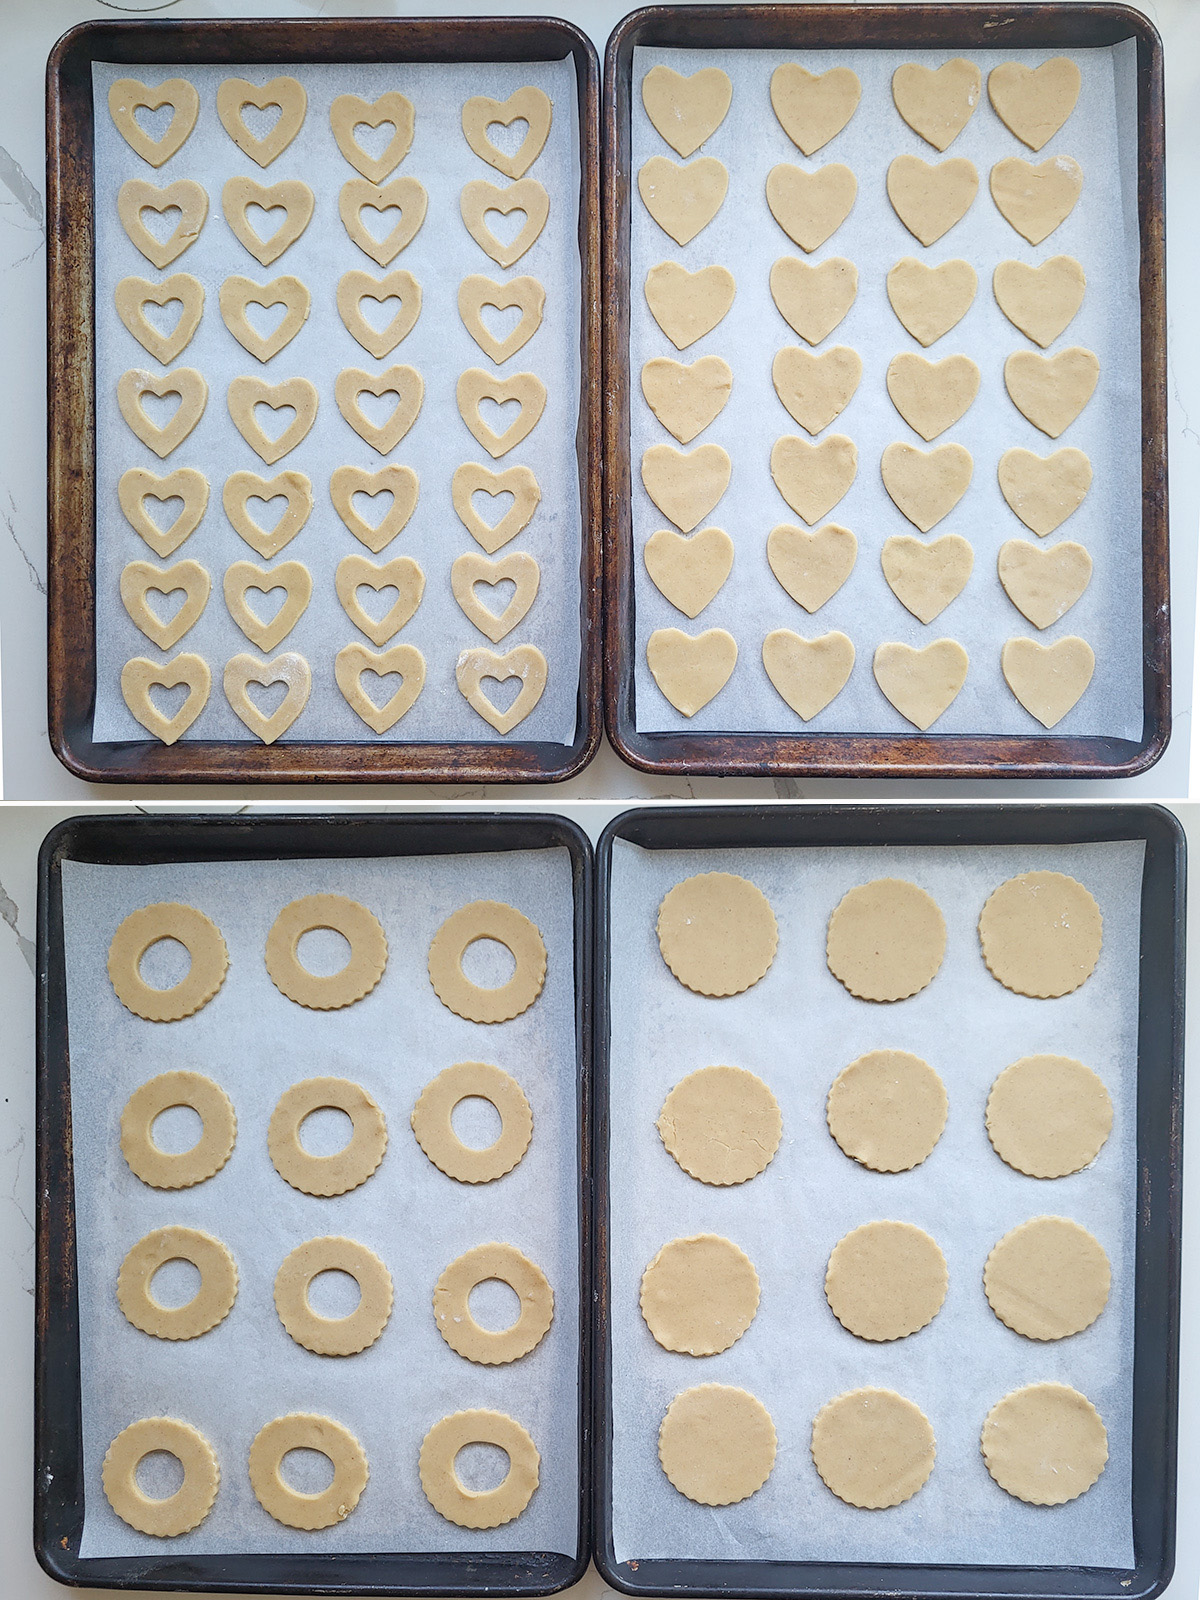 Four cookies sheets with heart and round cookie cut outs.